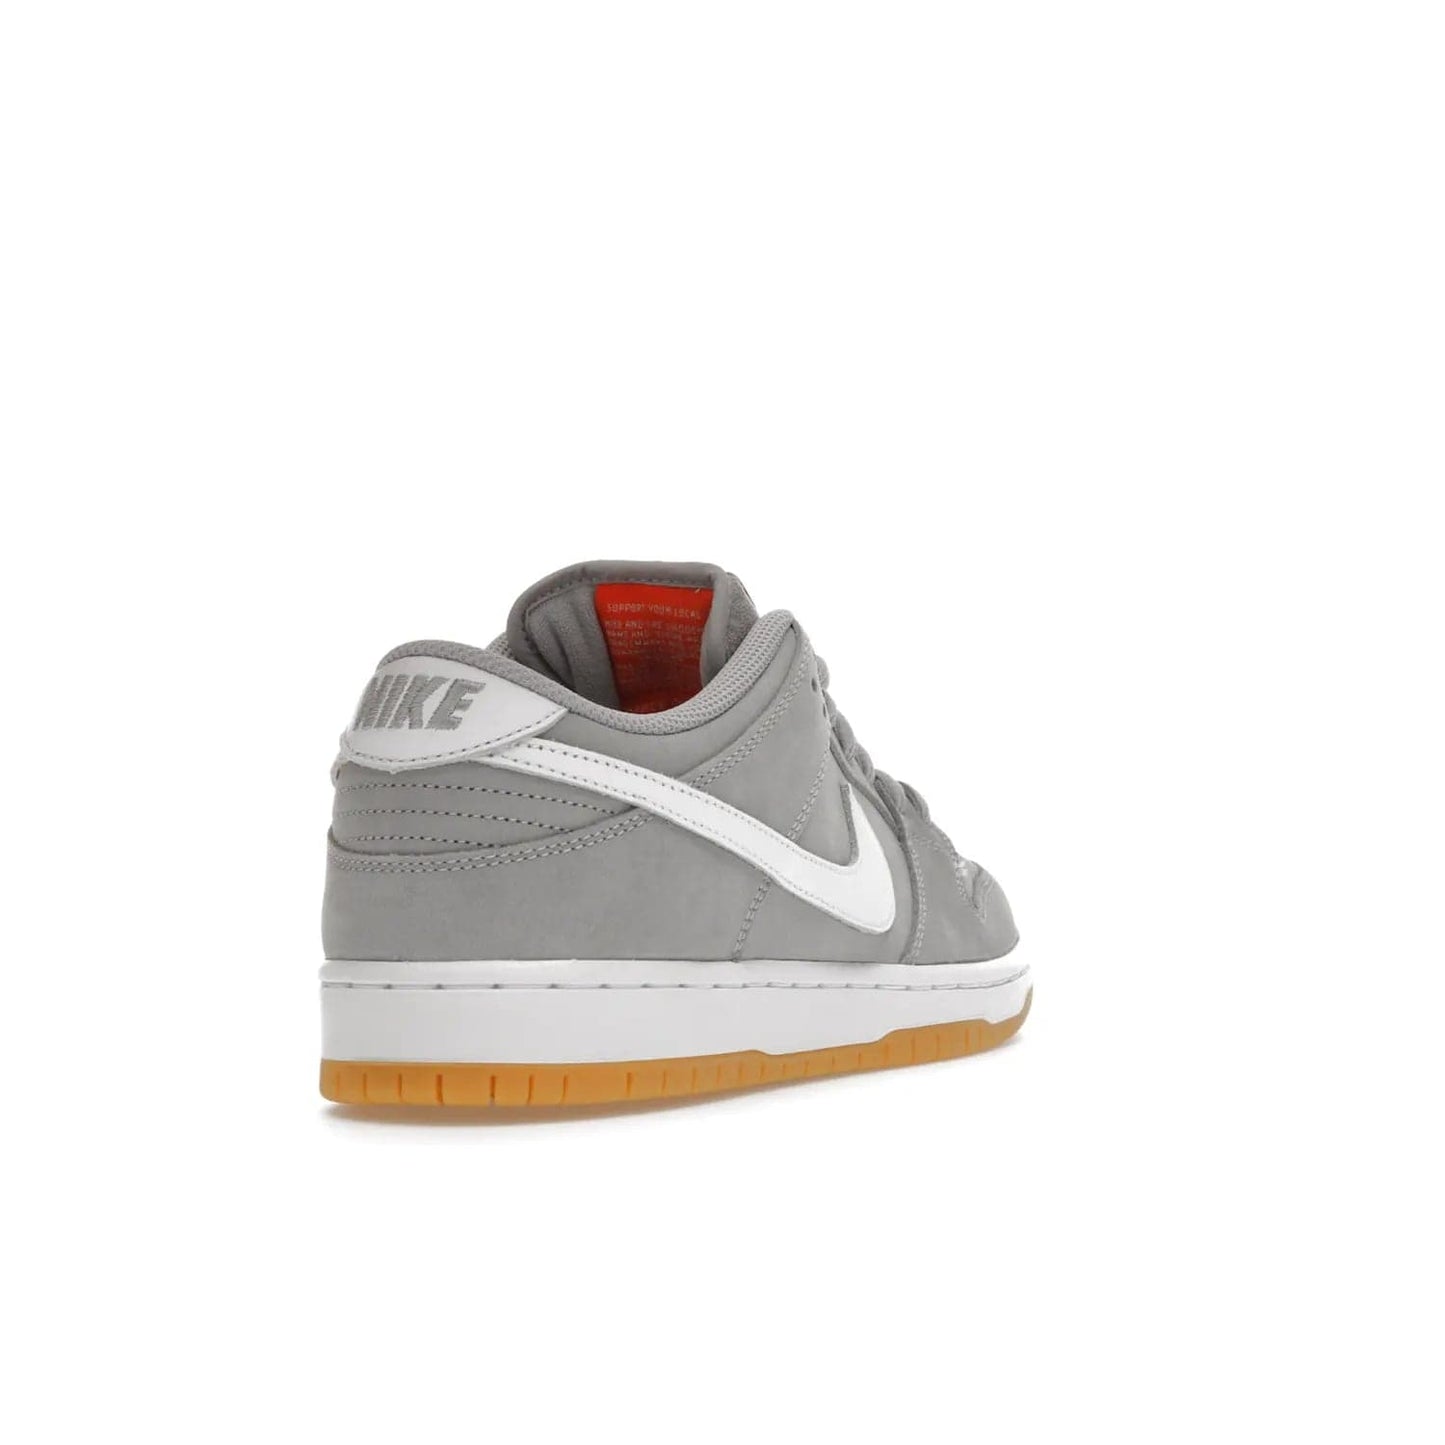 Nike SB Dunk Low Pro ISO Orange Label Wolf Grey Gum - Image 31 - Only at www.BallersClubKickz.com - Introducing Nike's SB Dunk Low Pro ISO Orange Label Wolf Grey Gum - a stylish shoe with a premium Wolf Grey upper, white leather Nike Swoosh, and an eye-catching gum outsole. With special Nike branding and packaging, this shoe adds a unique fashion statement. Out Feb. 24, 2023.